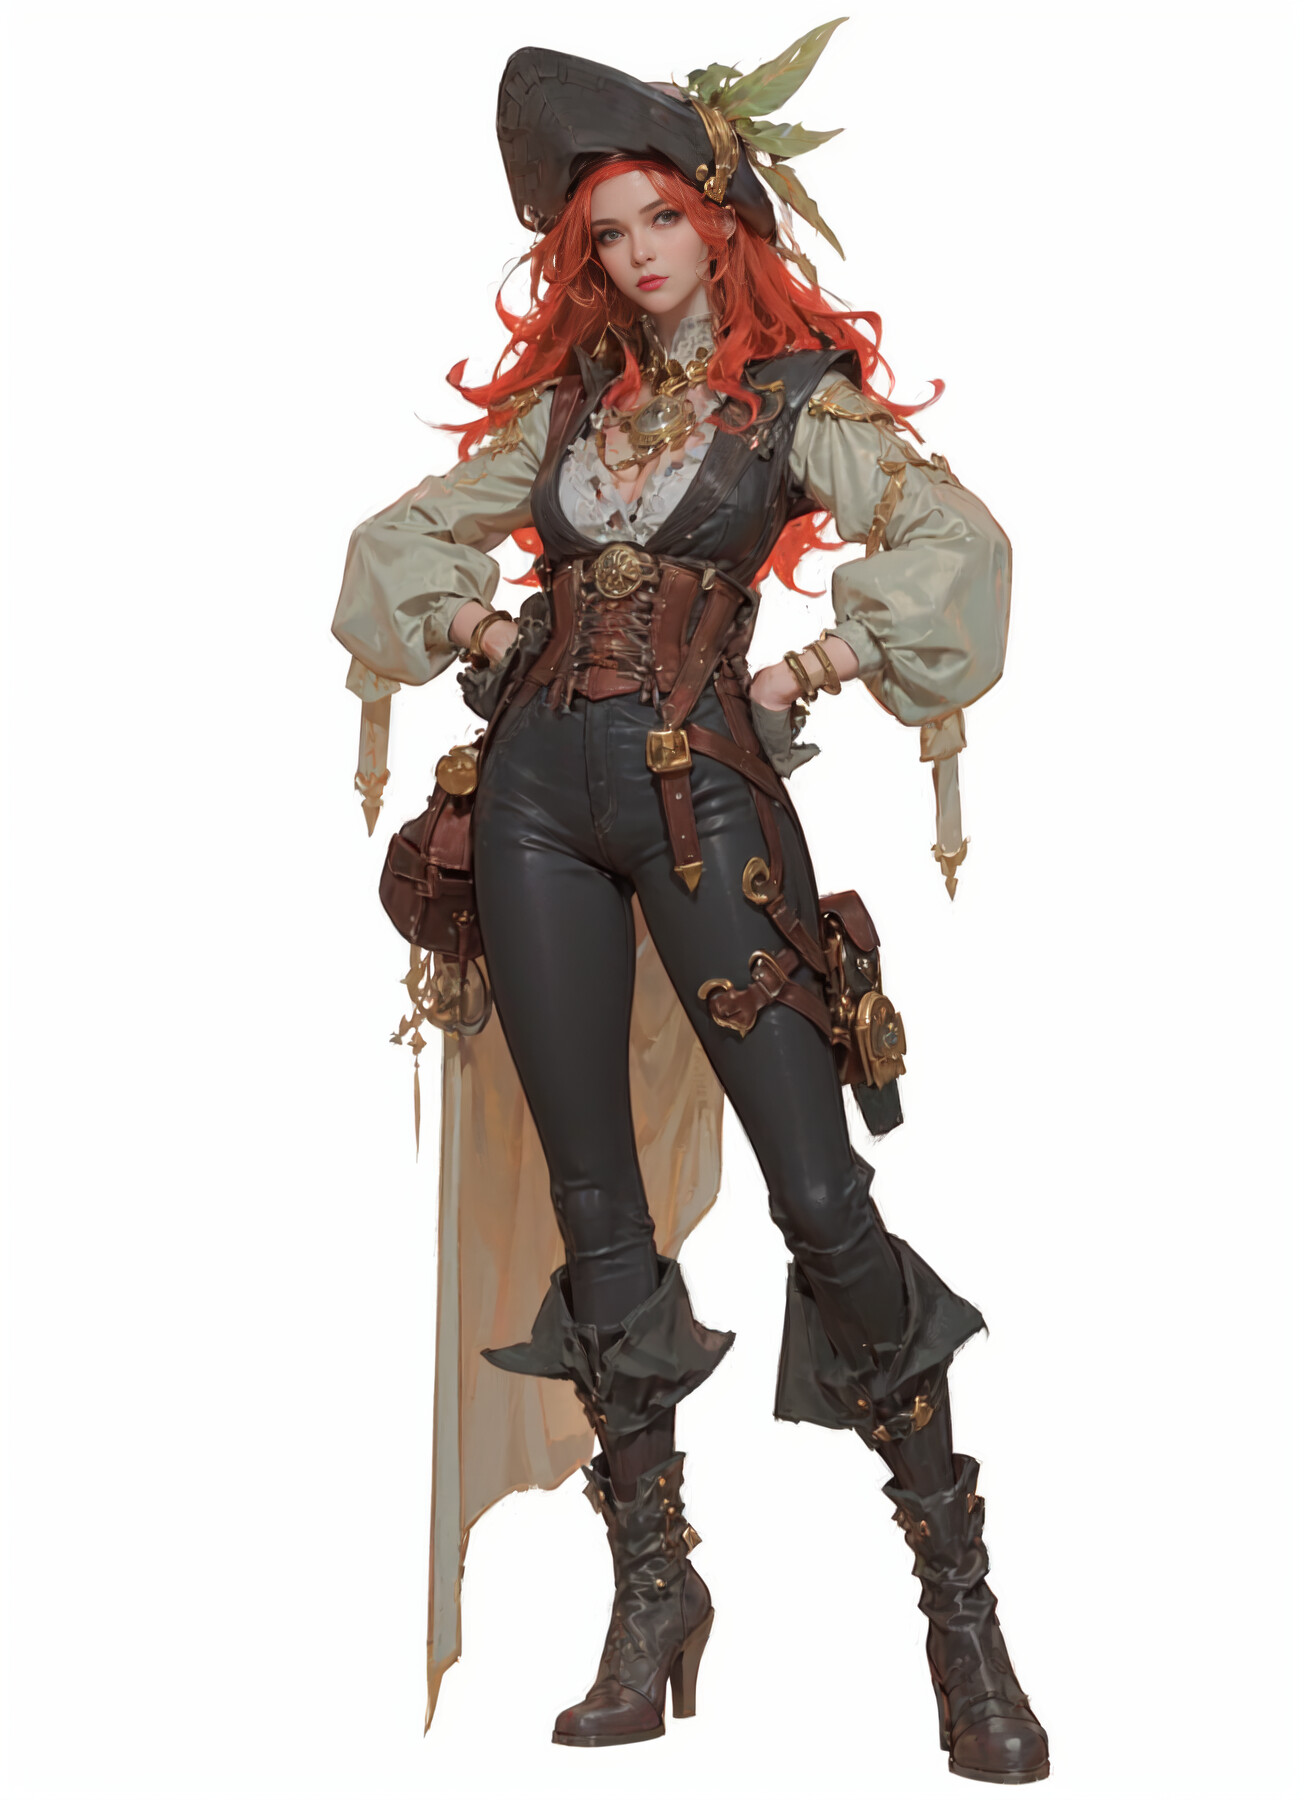 General 1304x1800 Peter Kaws drawing women redhead pirate girl white background AI art simple background hands on hips long hair gloves boots